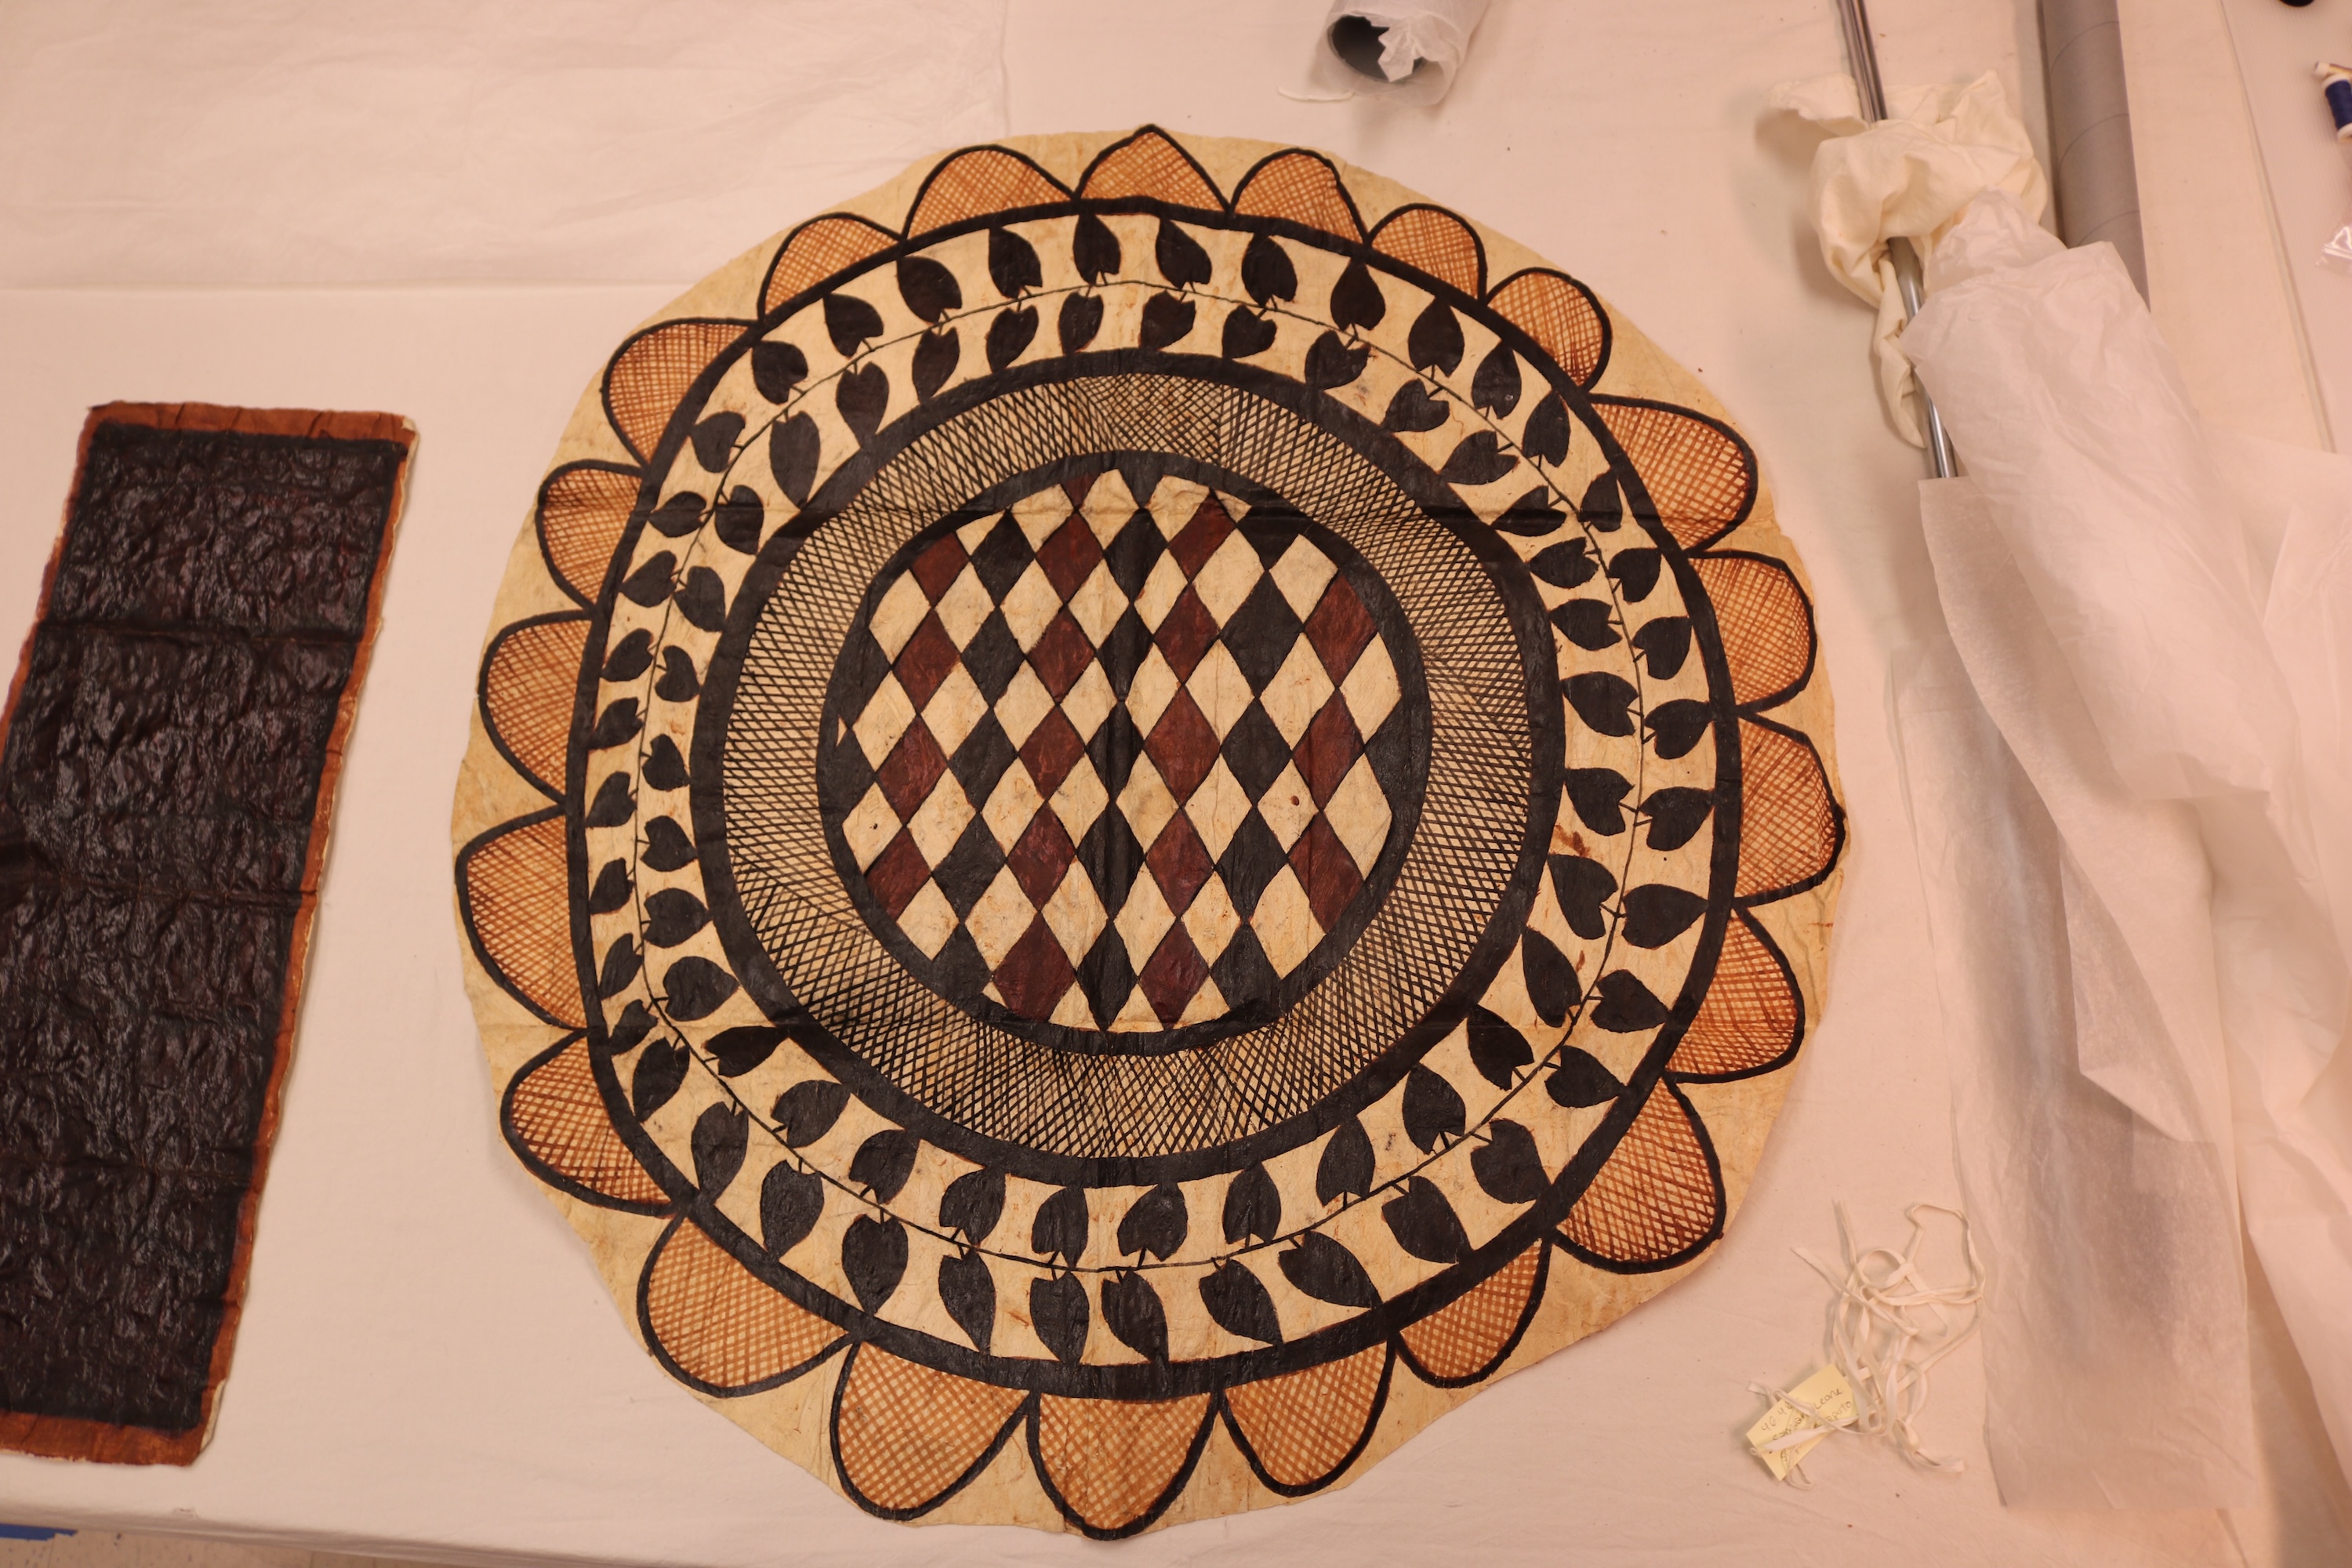 A circular siapo with a central checkerboard pattern, a border of leaves, and a scalloped design around the edge